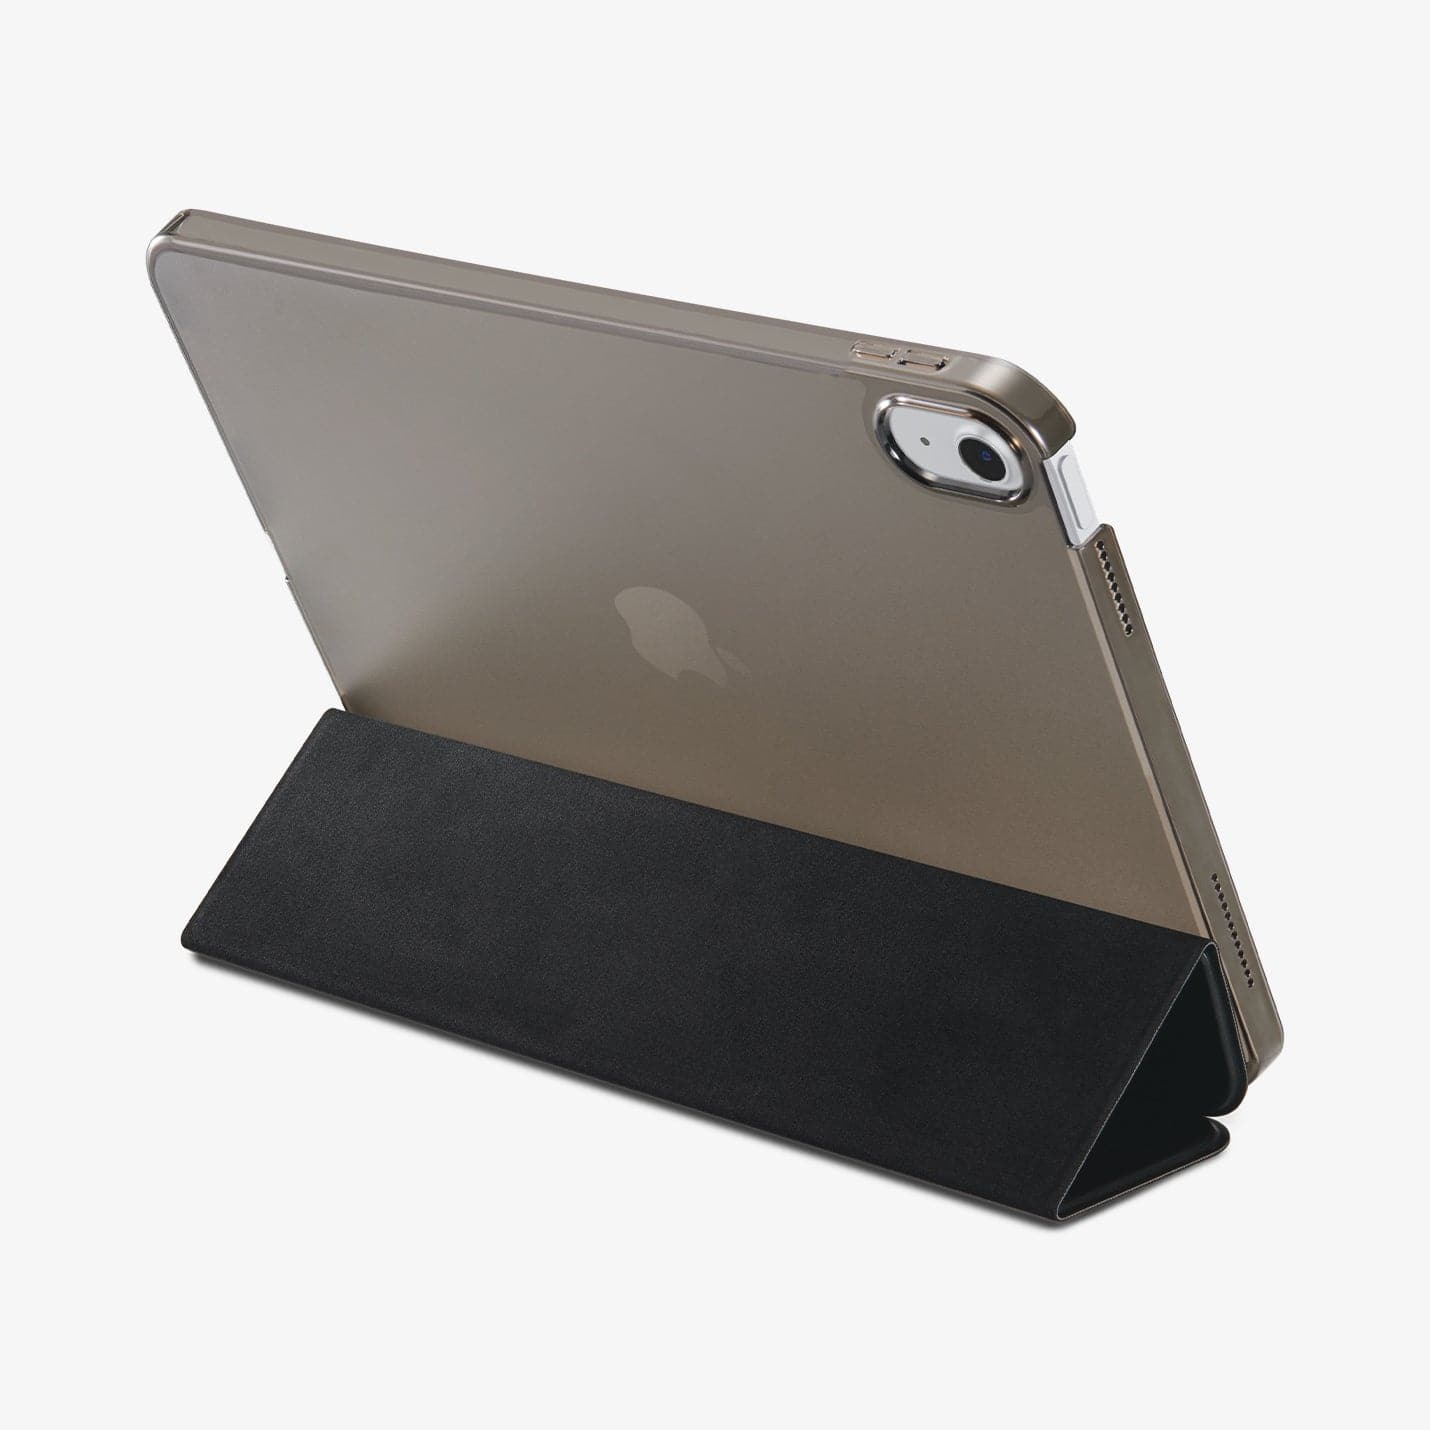 ACS05309 - iPad 10.9" Case Smart Fold in black showing the back and top with device propped up by built in kickstand